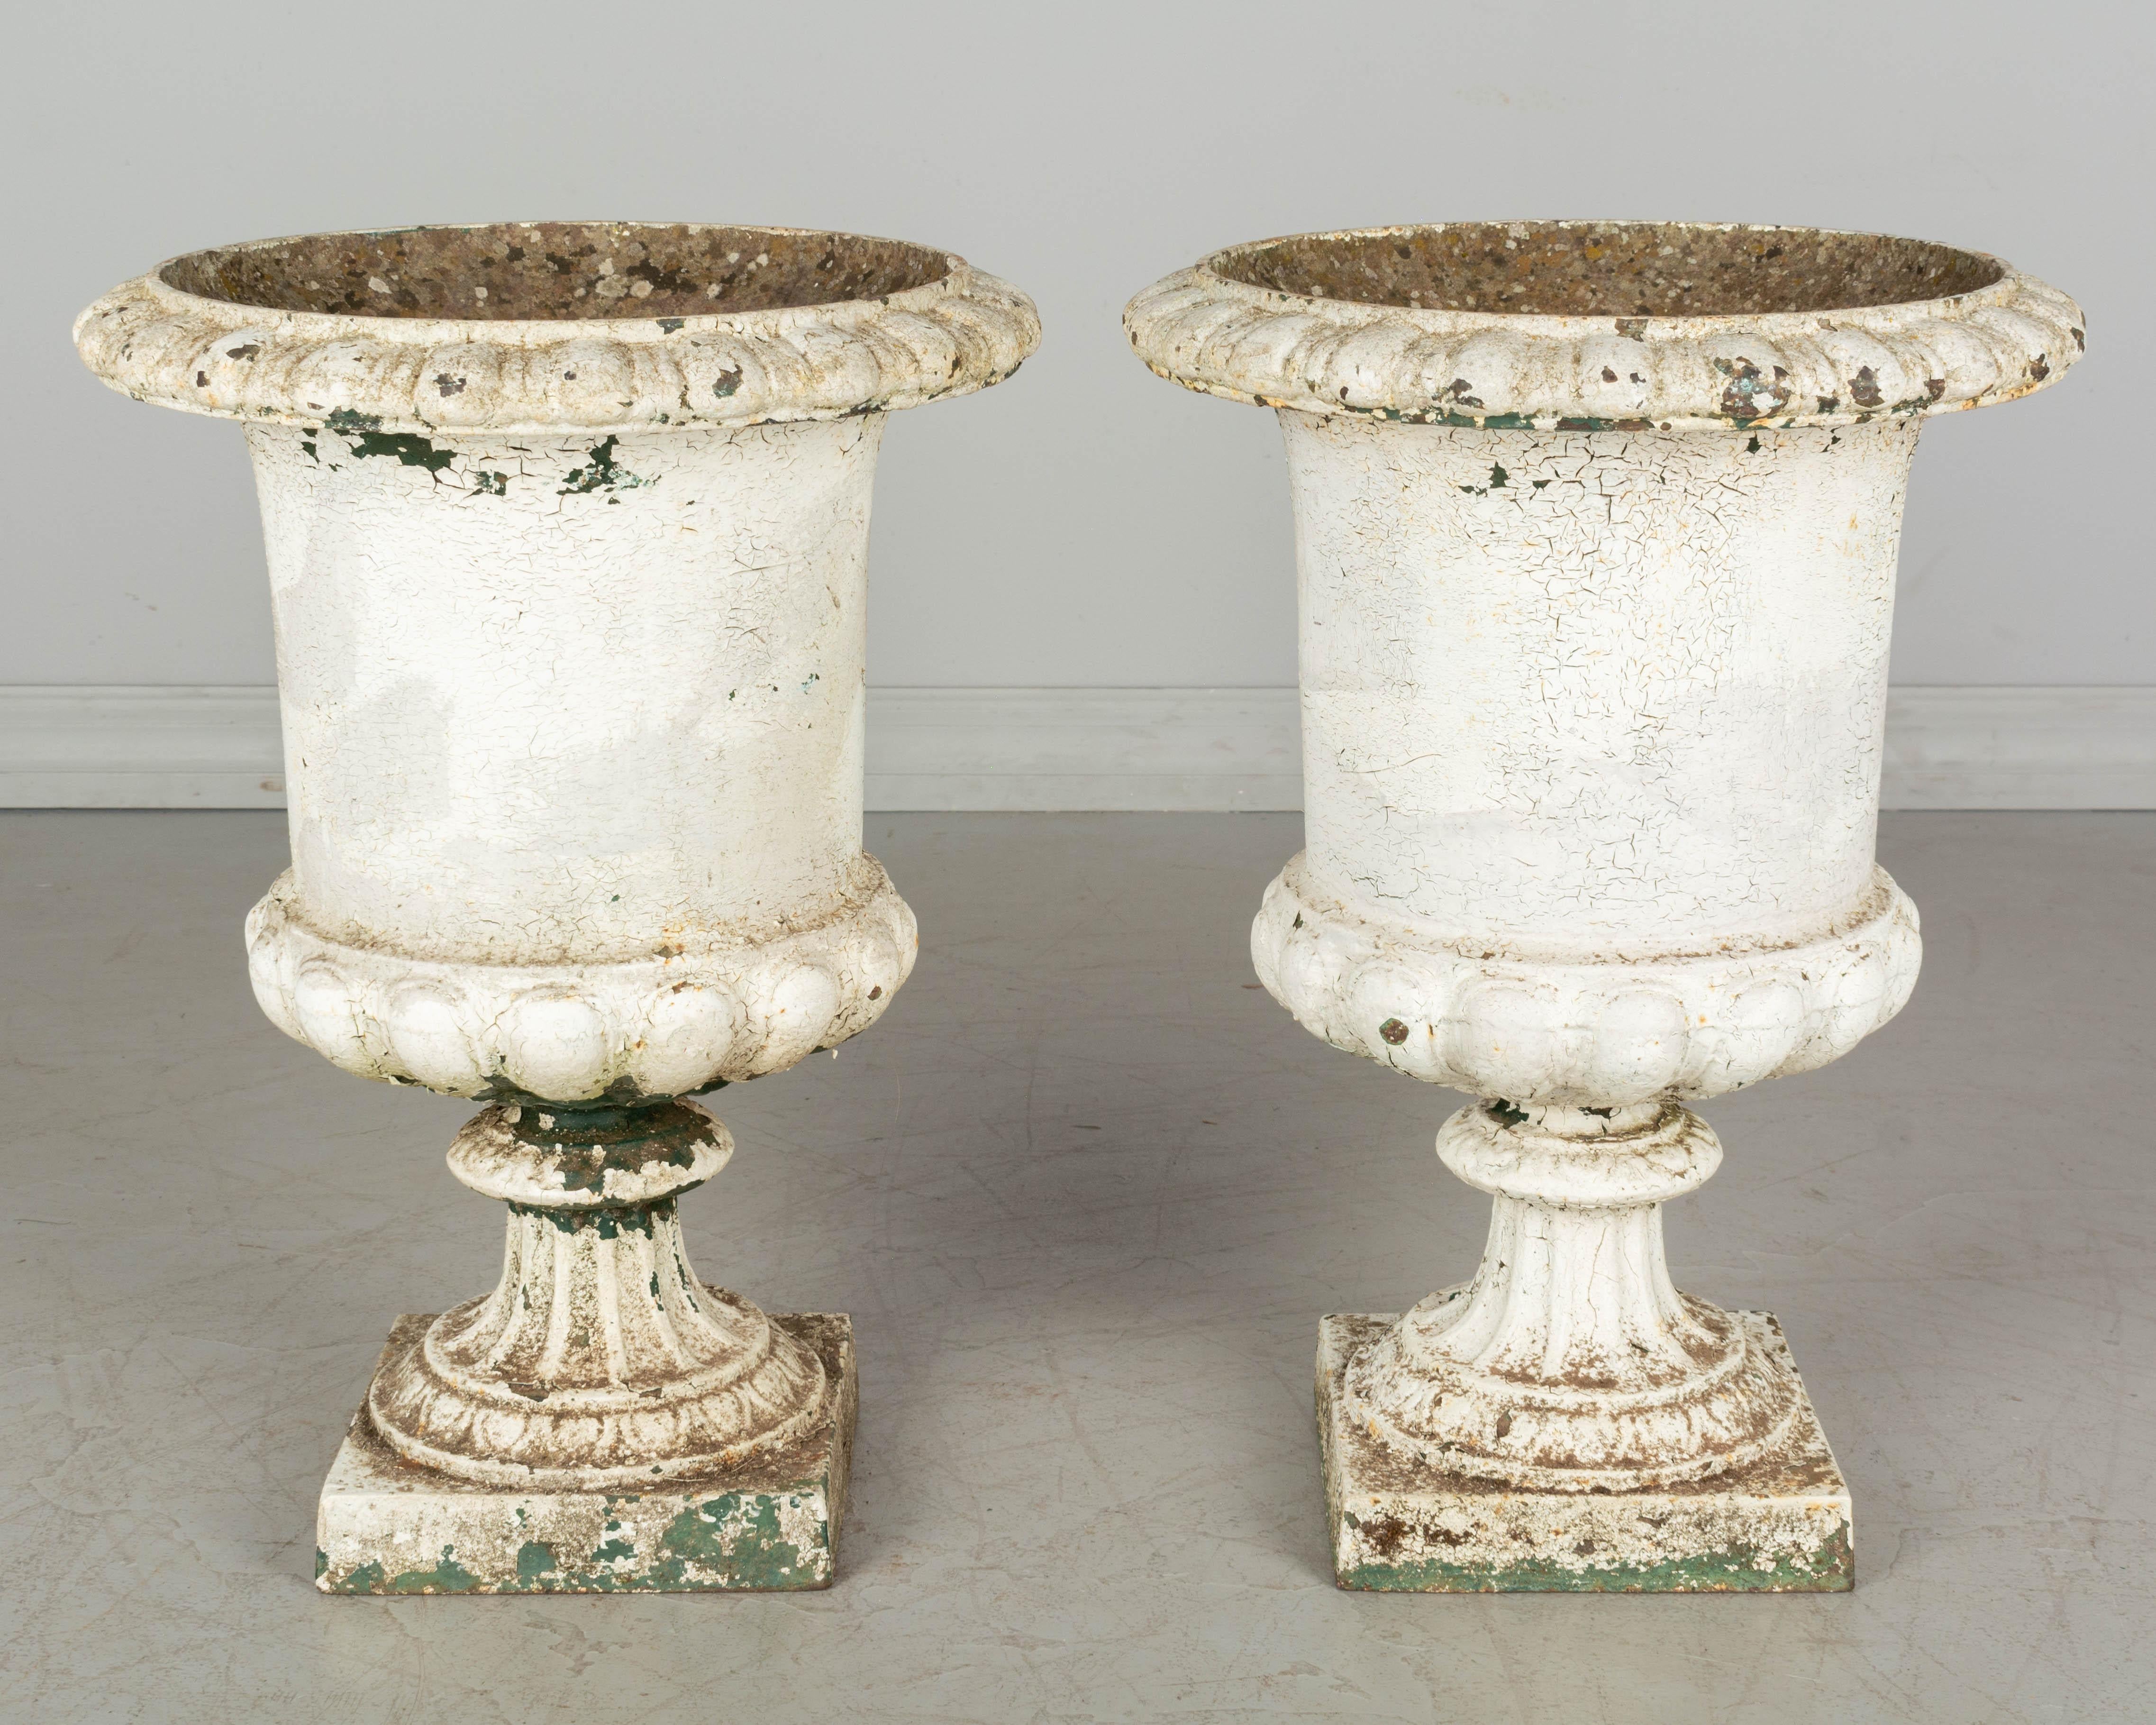 A pair of early 19th century French cast iron garden urn planters, with tall proportions. Original weathered white painted patina, cracking and peeling away is places exposing a layer of green paint beneath. Weight: 53 lbs. each. Measures: 19.75